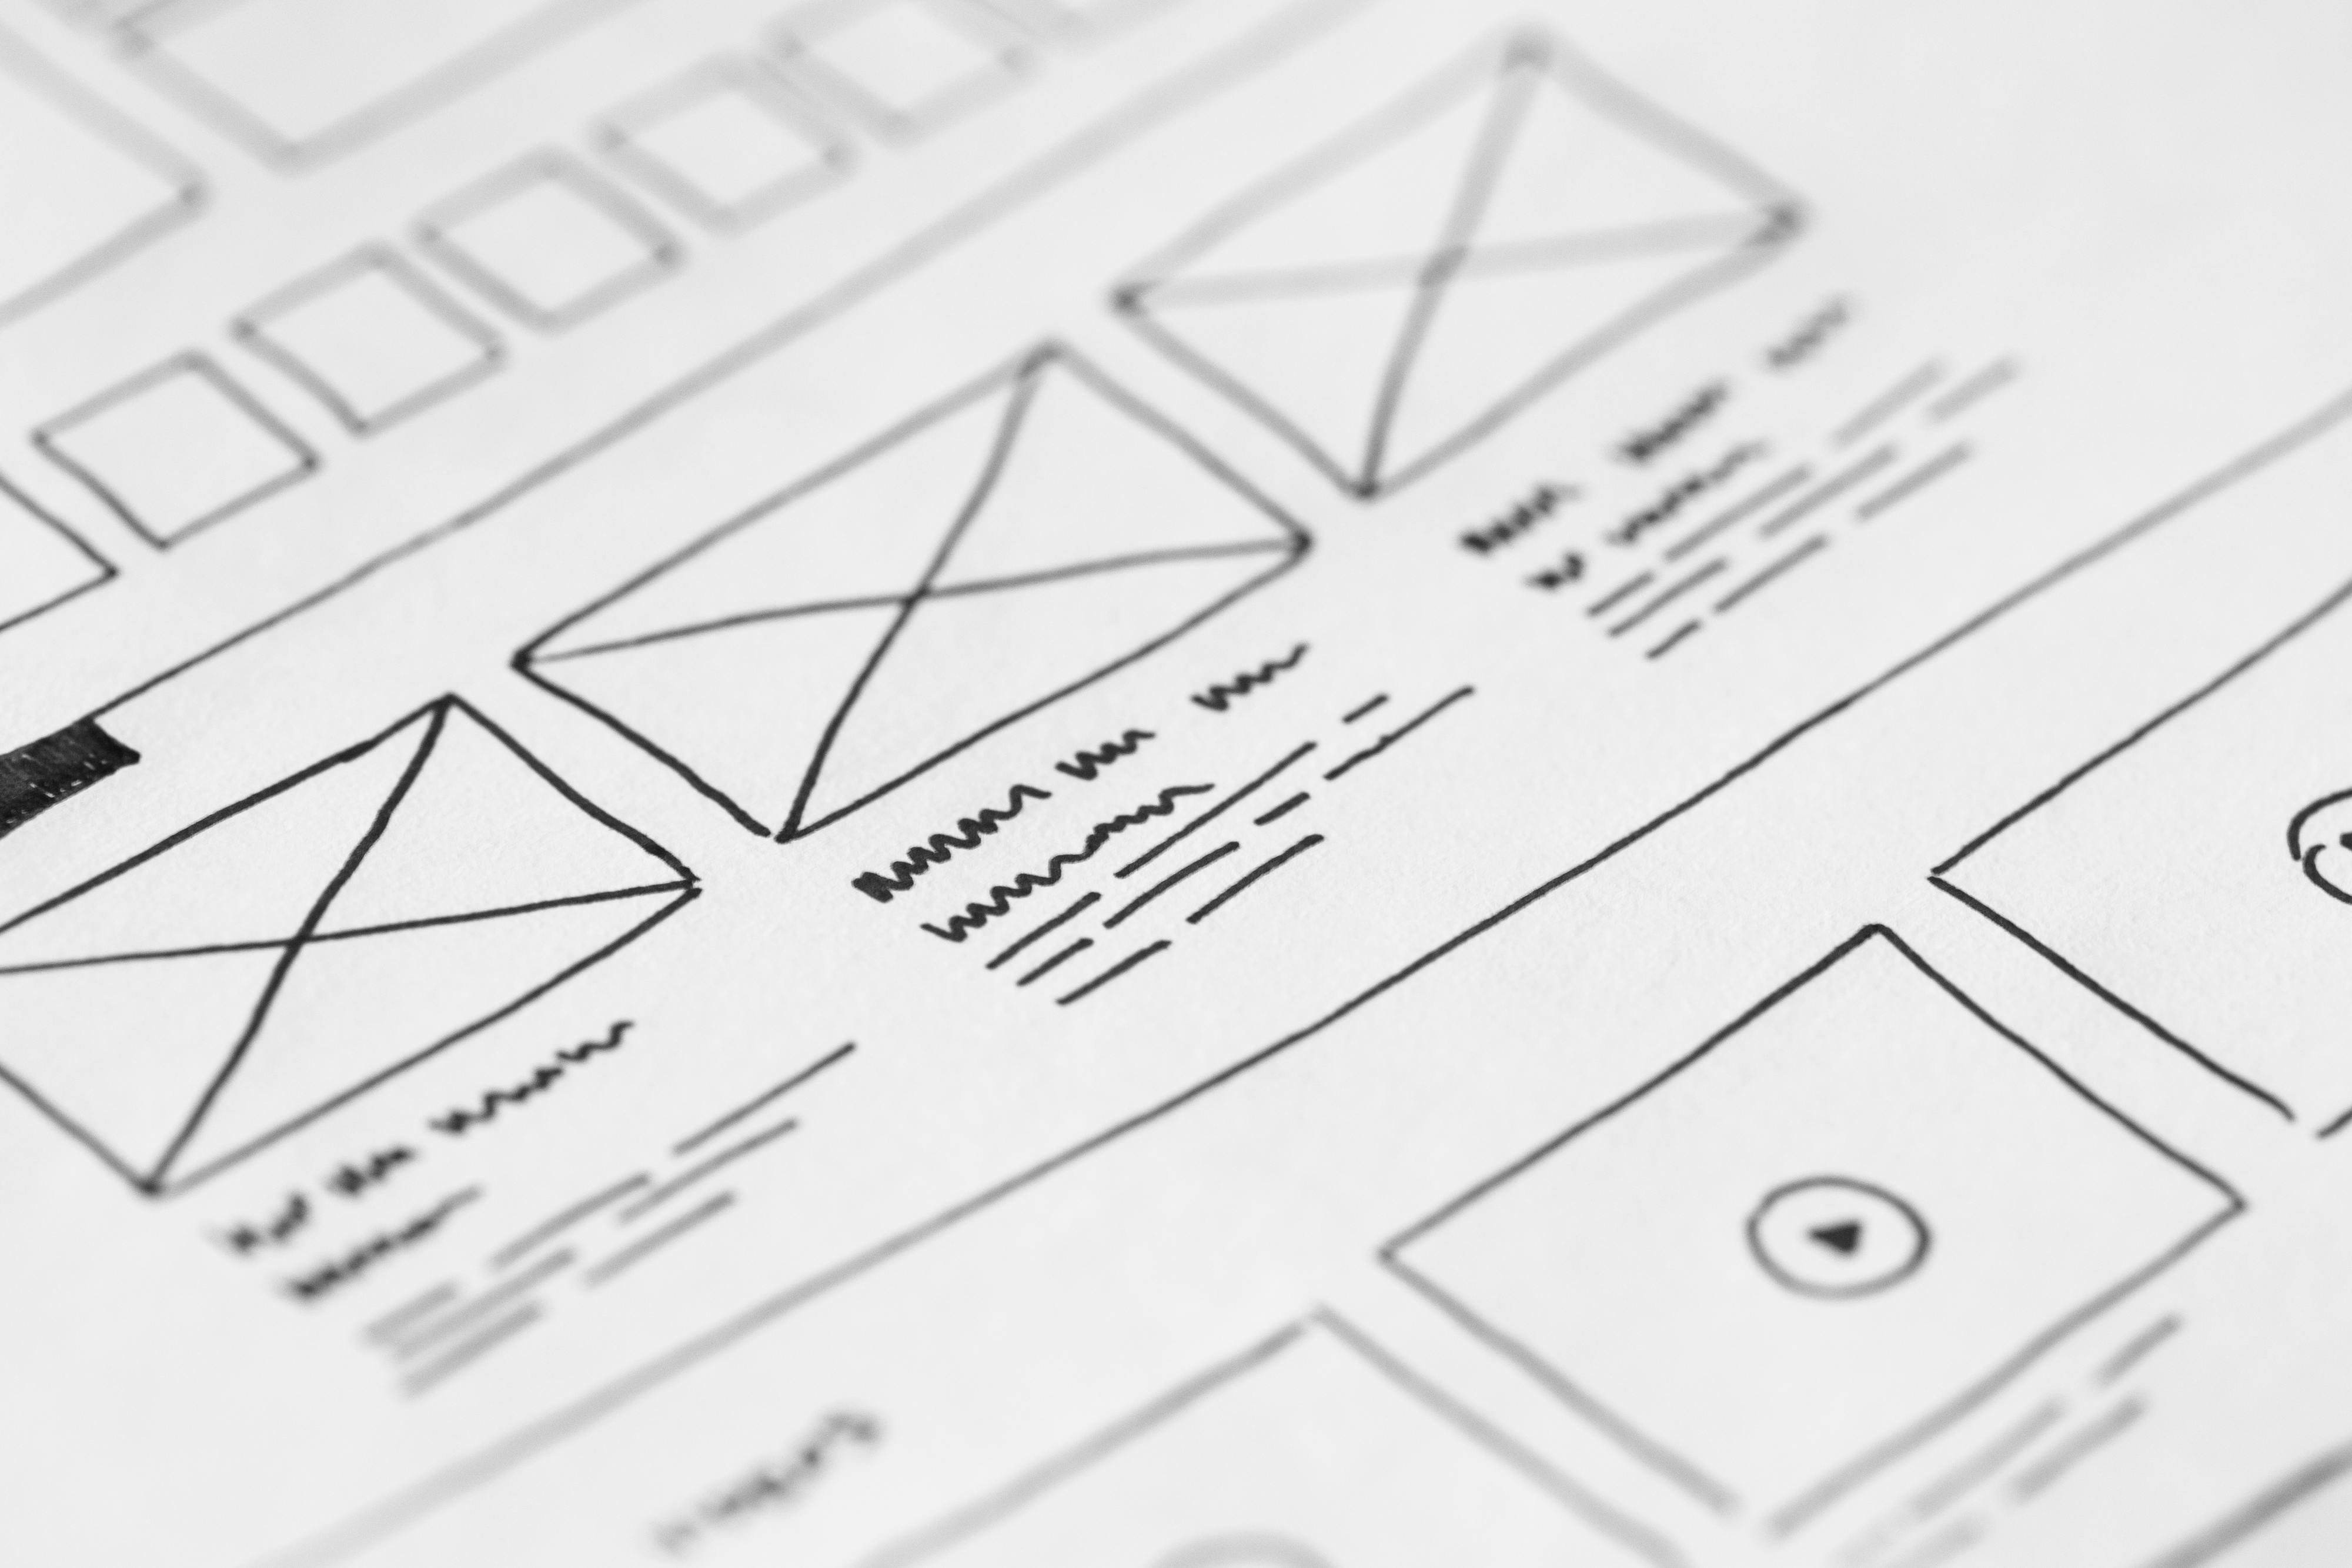 The Role of Information Architecture in Good User Experience Design